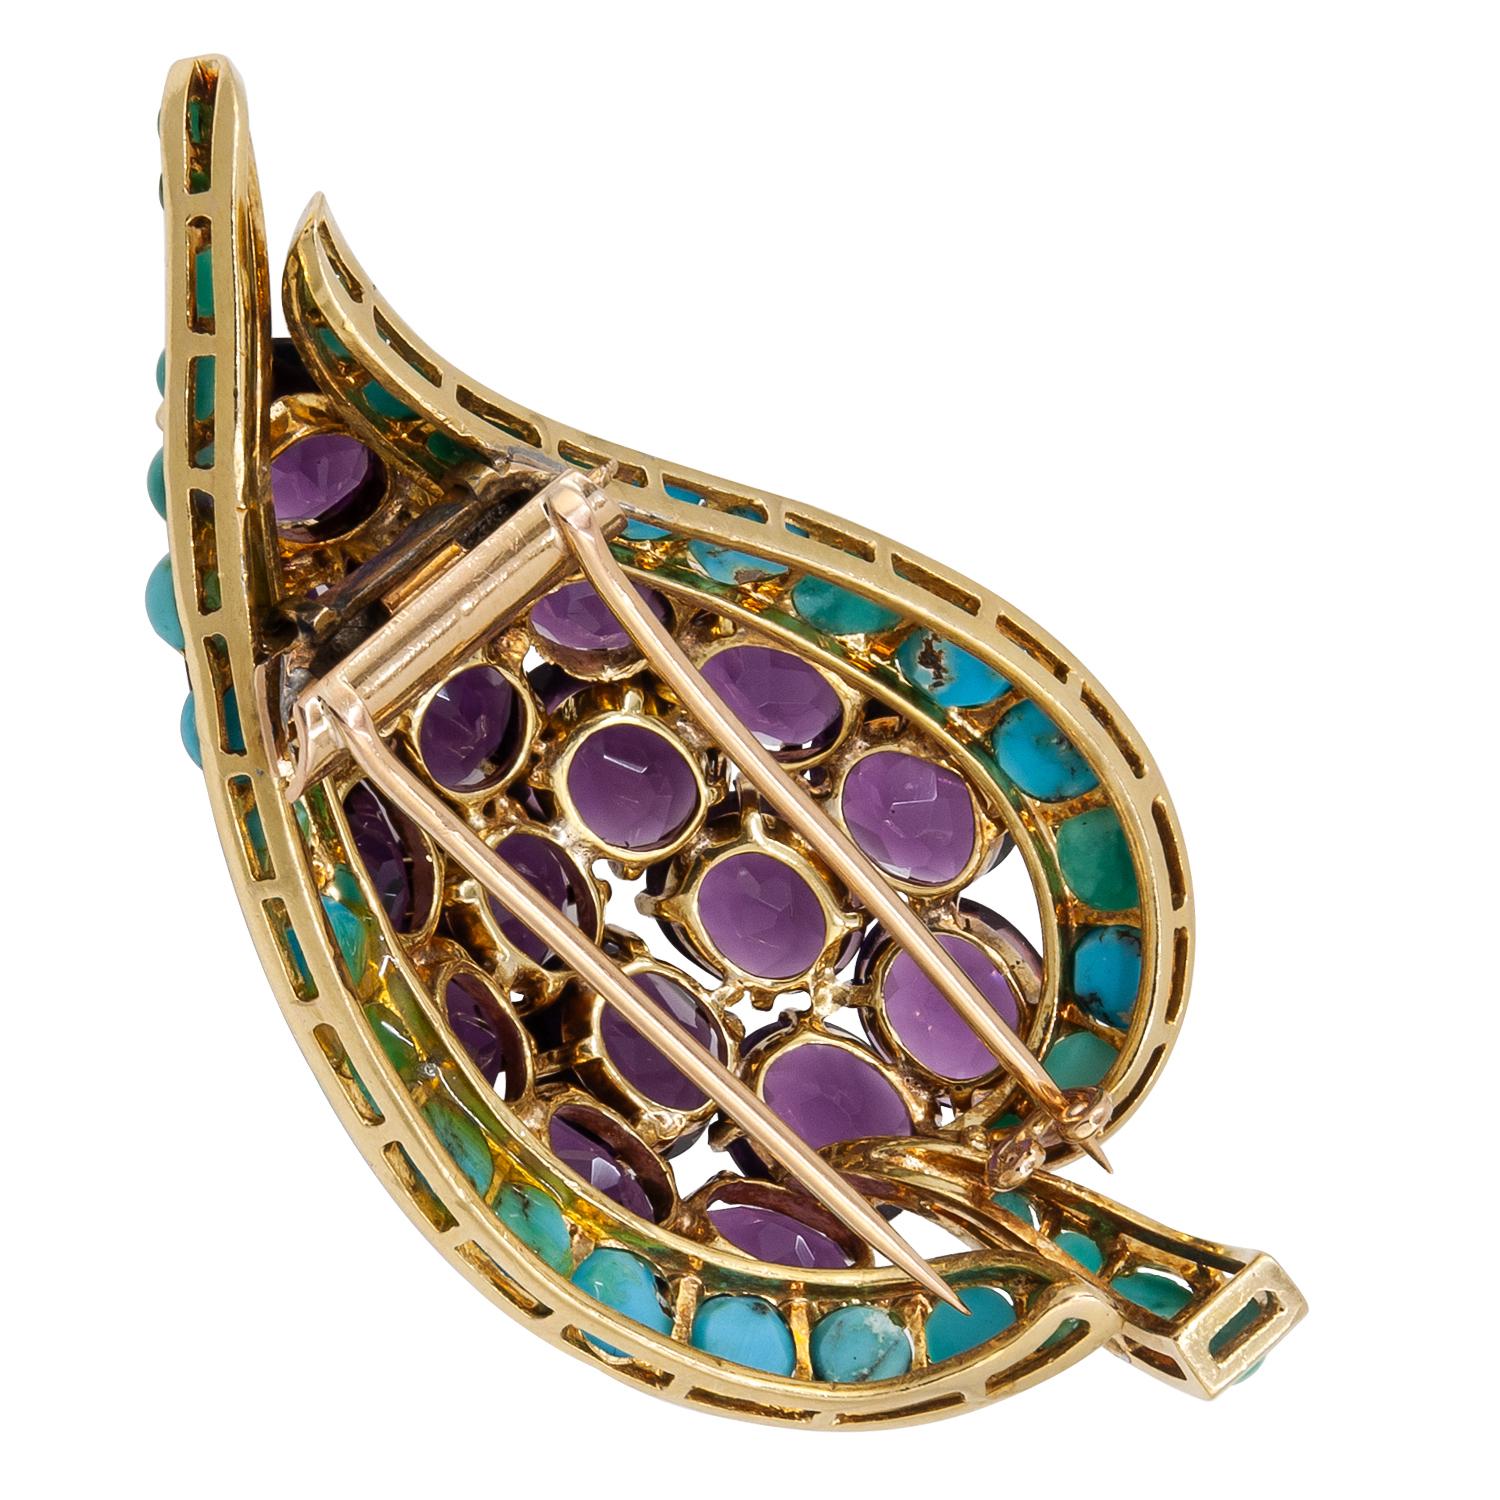 Mixed Cut Cabochon Amethyst, Turquoise Paisley Brooch & Earrings